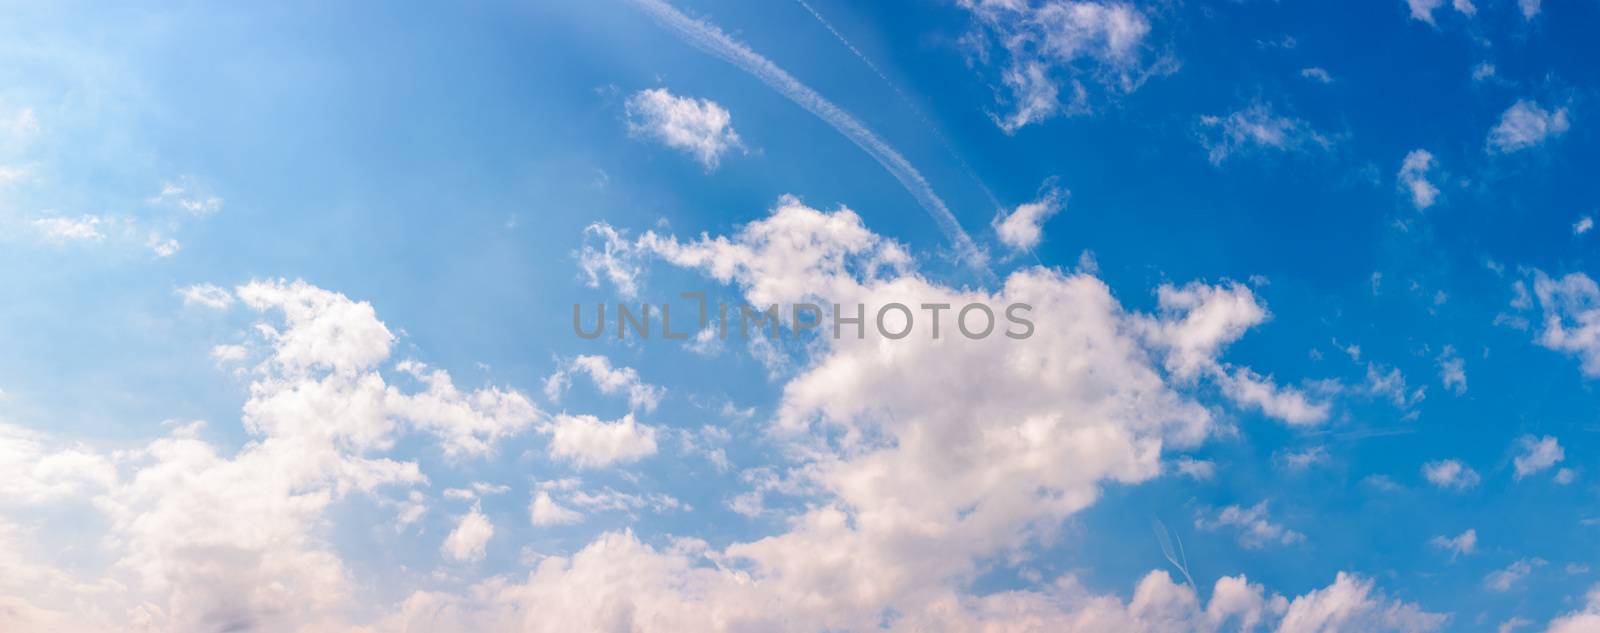 amazing cloud formations on a blue sky by Pellinni